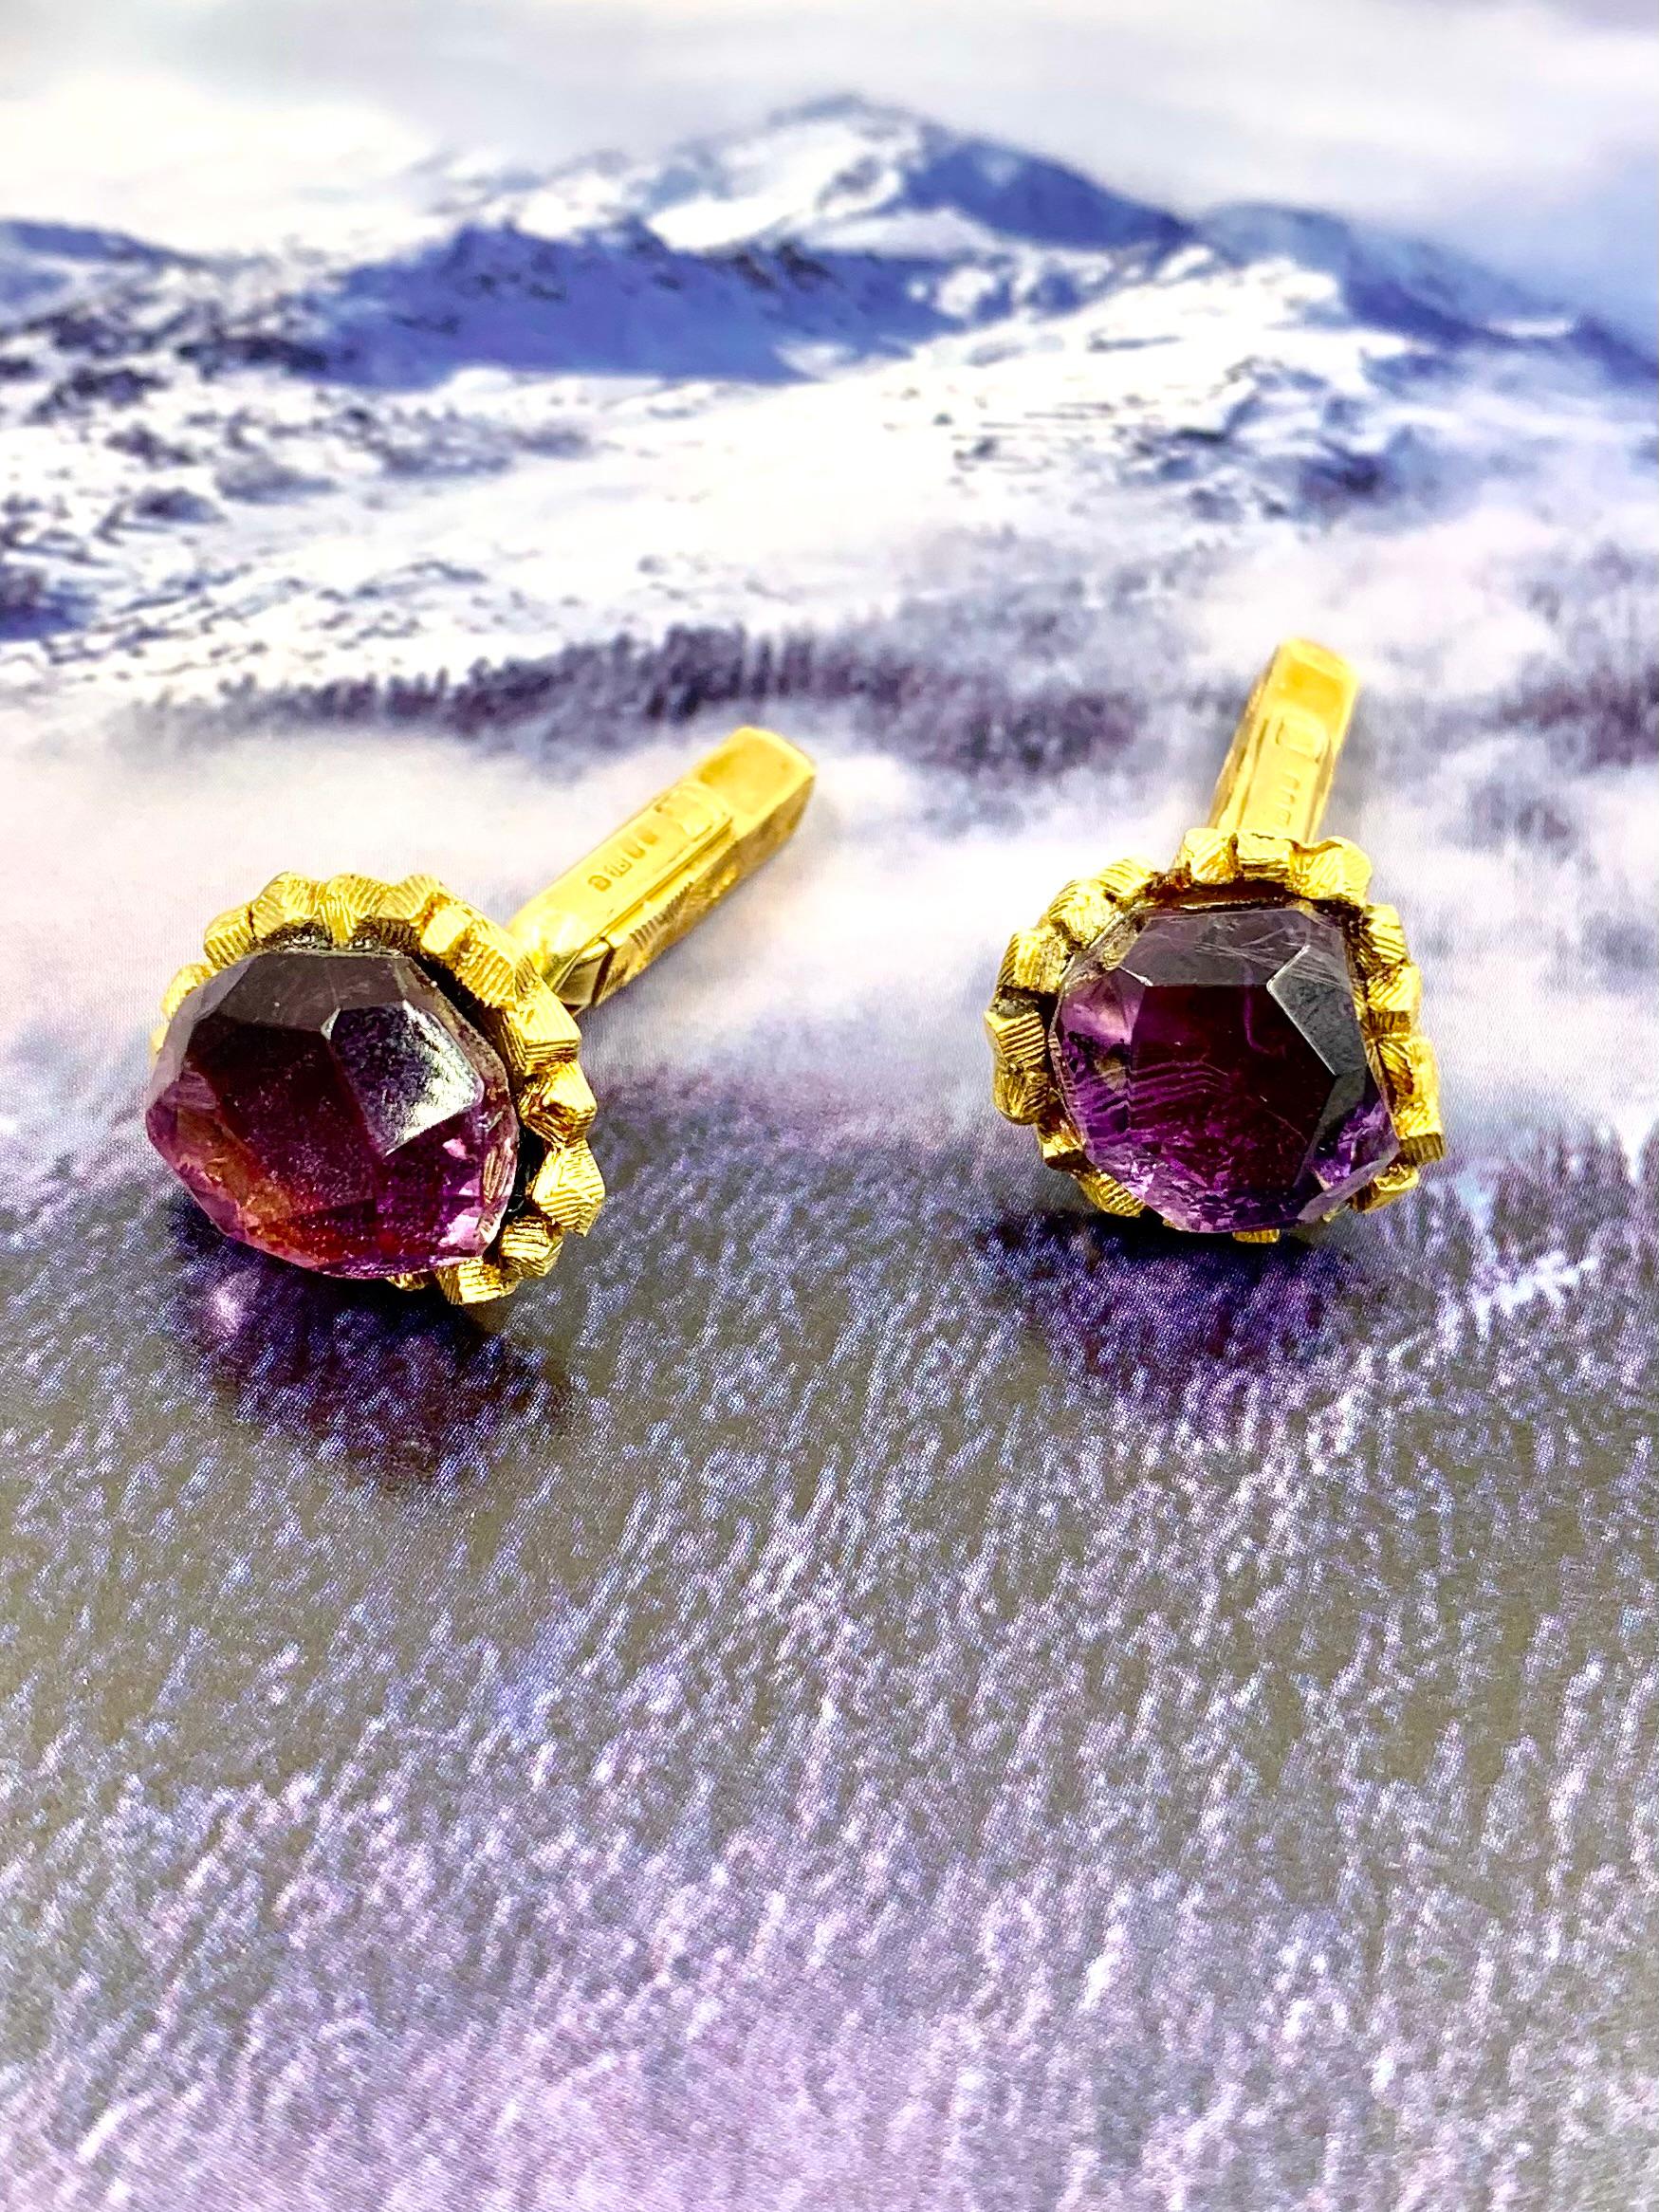 Rare Organic Modernist 18K yellow gold and faceted amethyst John Donald cufflinks from his most sought-after period, the 1960's
Marks: JAD for John Donald, London, 18 for 18K gold,  